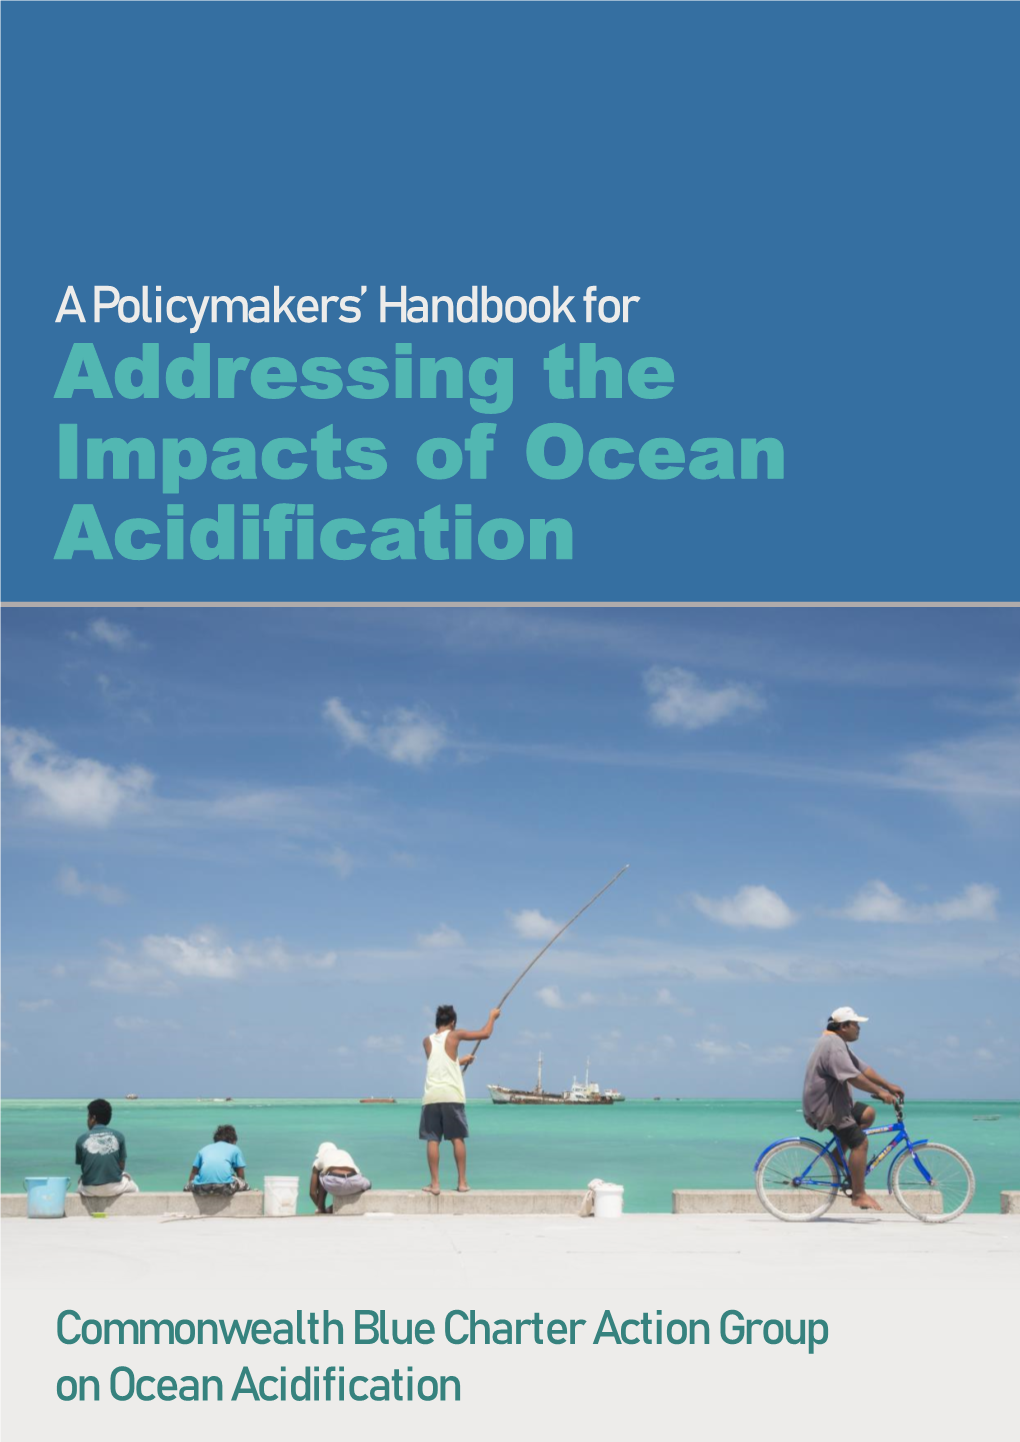 A Policymakers' Handbook for Addressing the Impacts of Ocean